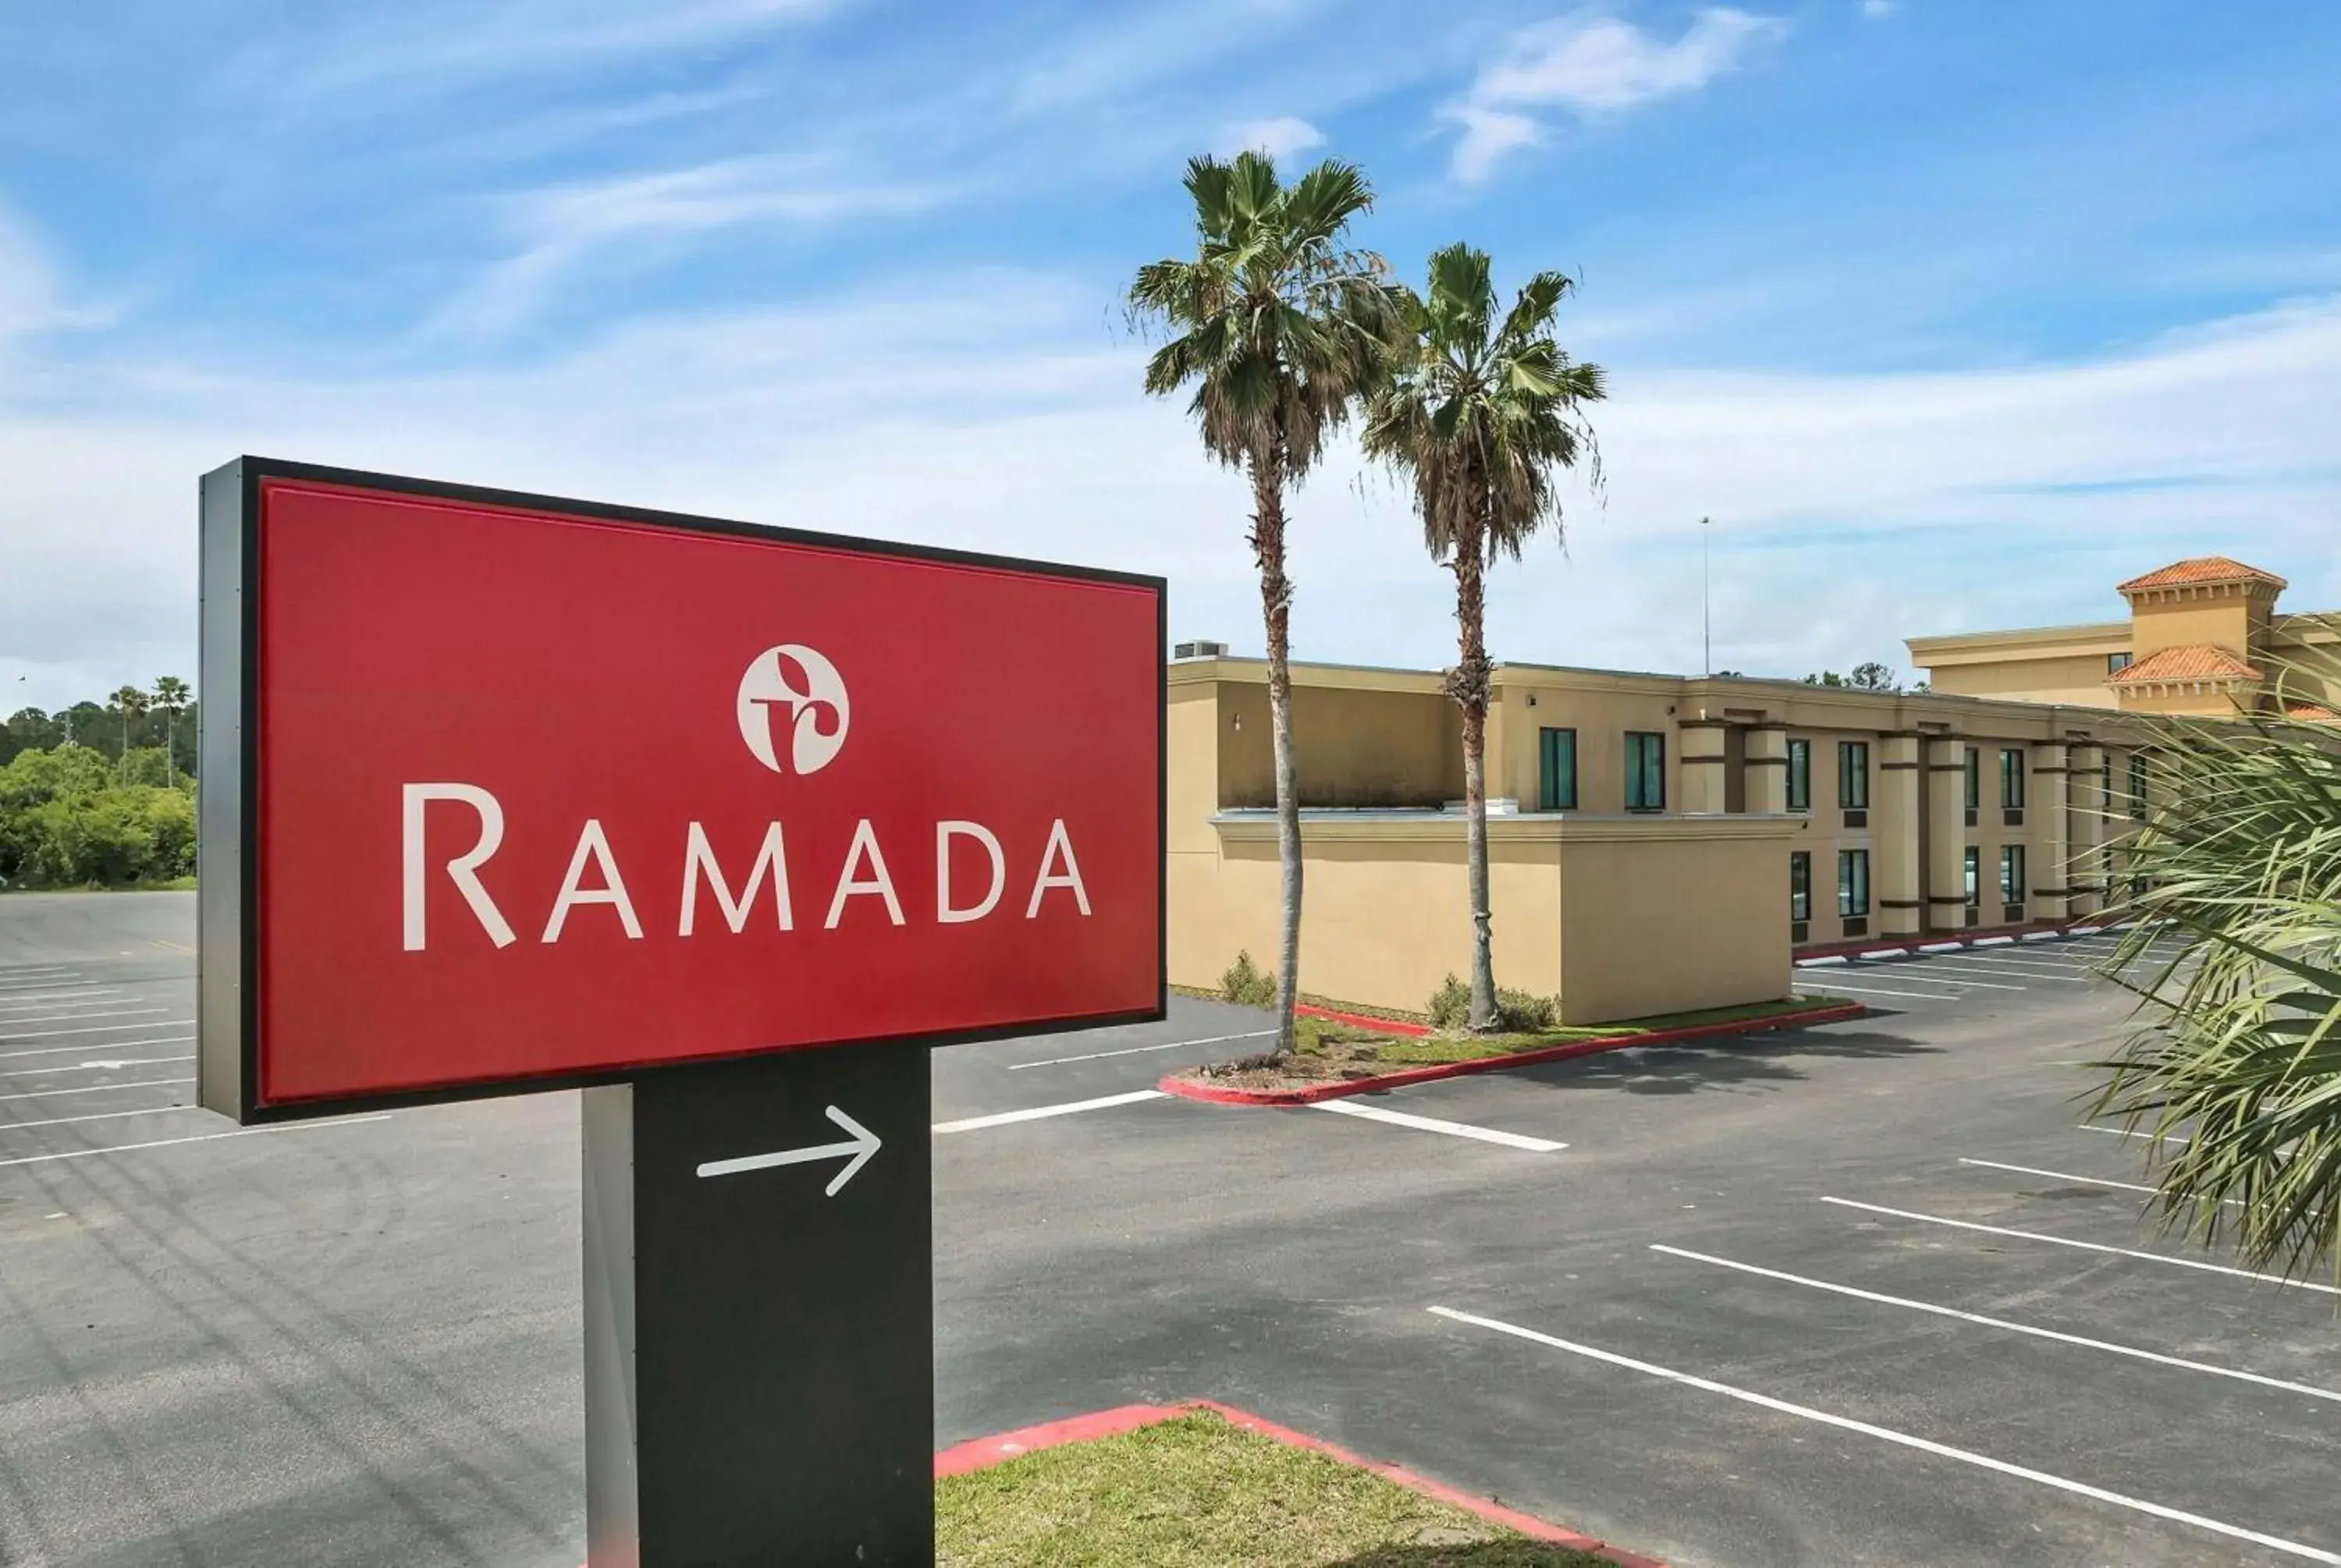 Property building in Ramada by Wyndham Jacksonville I-95 by Butler Blvd